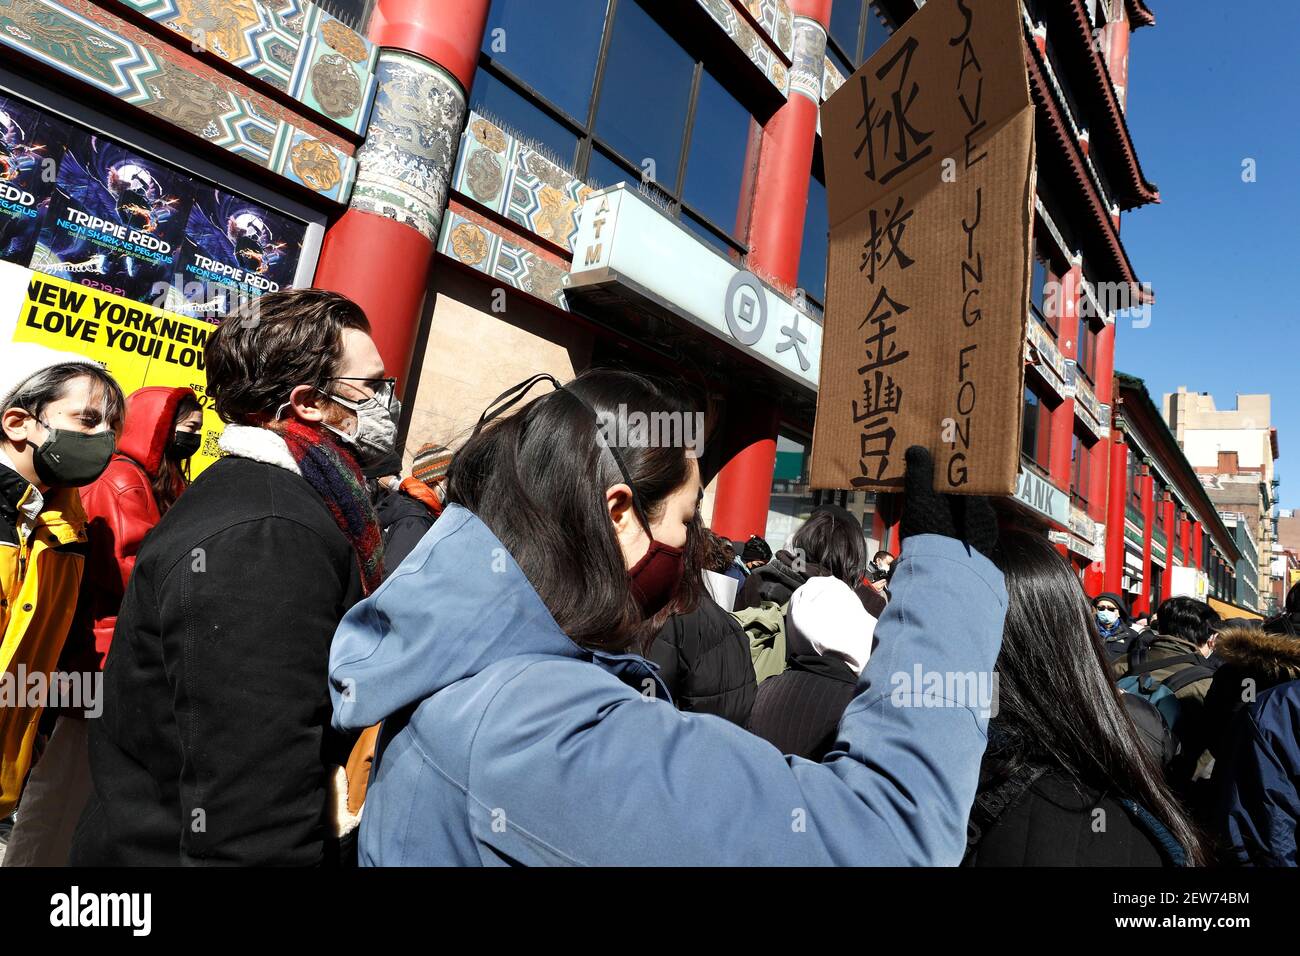 A demonstrator from 318 restaurant workers union holds up a placard during a demonstration against the closure of Jing Fong restaurant in Chinatown. Recent extraordinary rental demands placed by Jonathan Chu, the biggest landlord in Chinatown, on small business has forced many to shutter their doors. Such demands have forced Jing Fong restaurant to end operations by March 7, 2021. Stock Photo